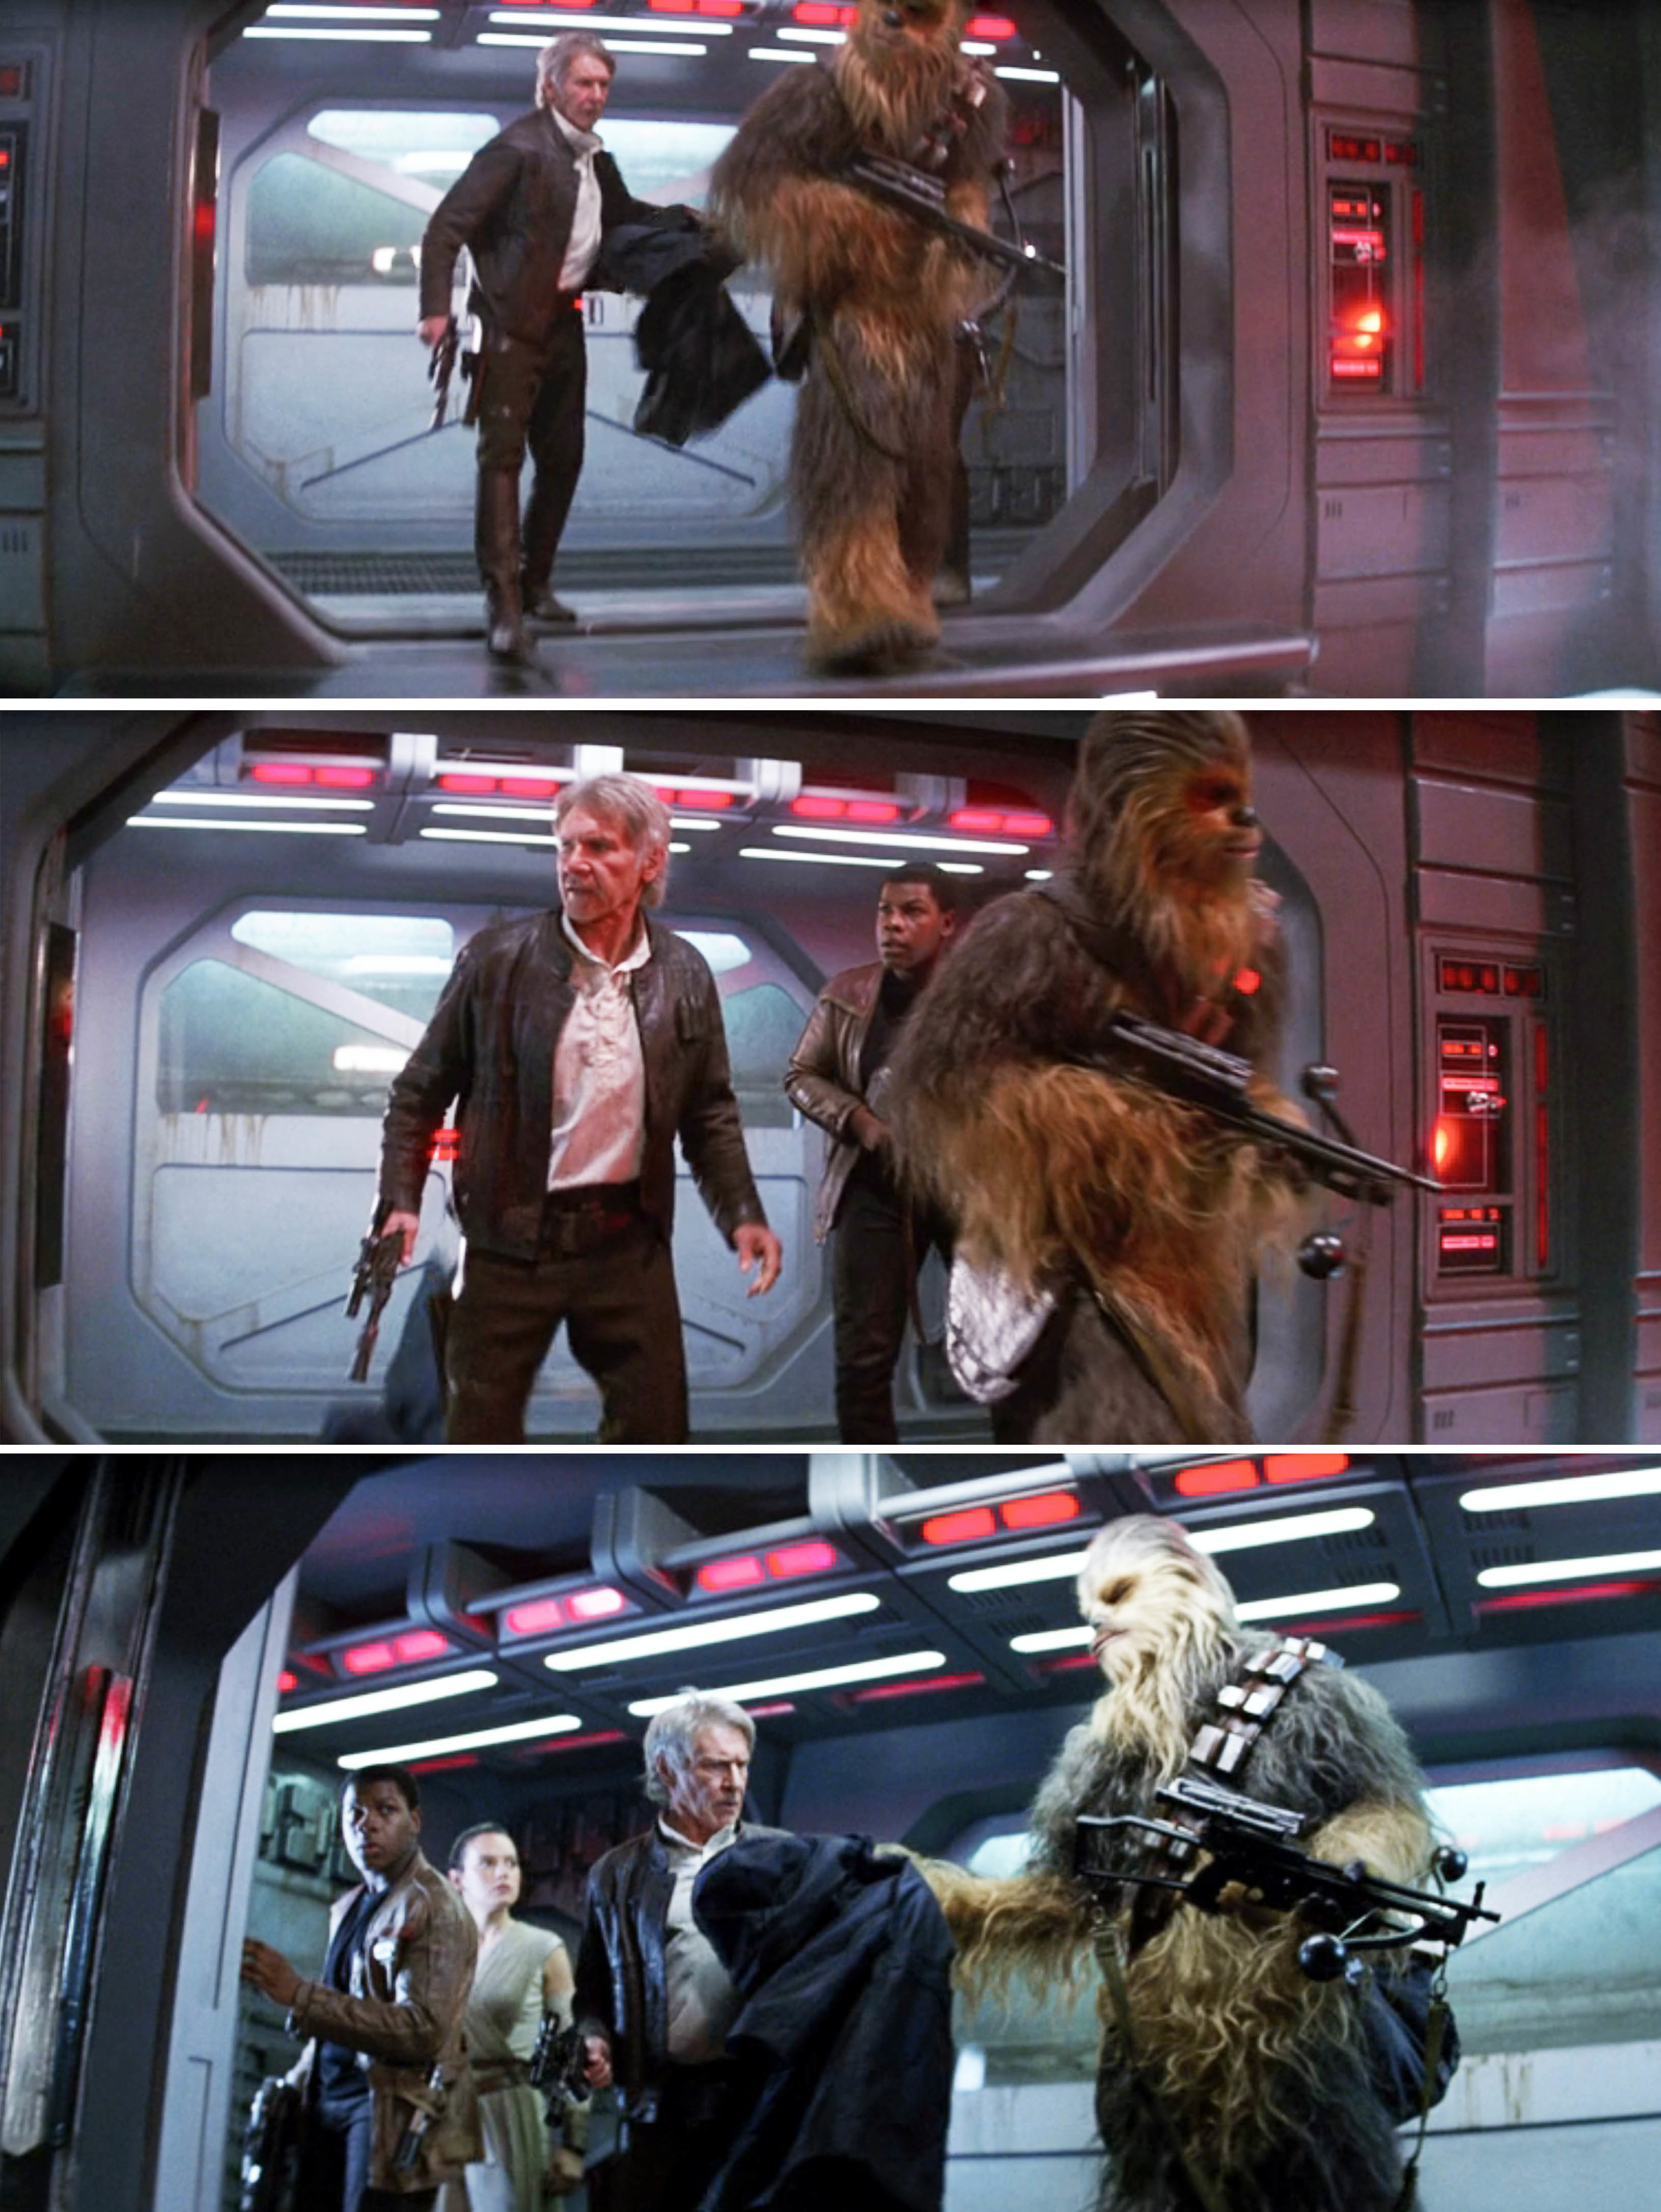 Han Solo, Chewbacca, and Finn in a tense action scene aboard a spaceship